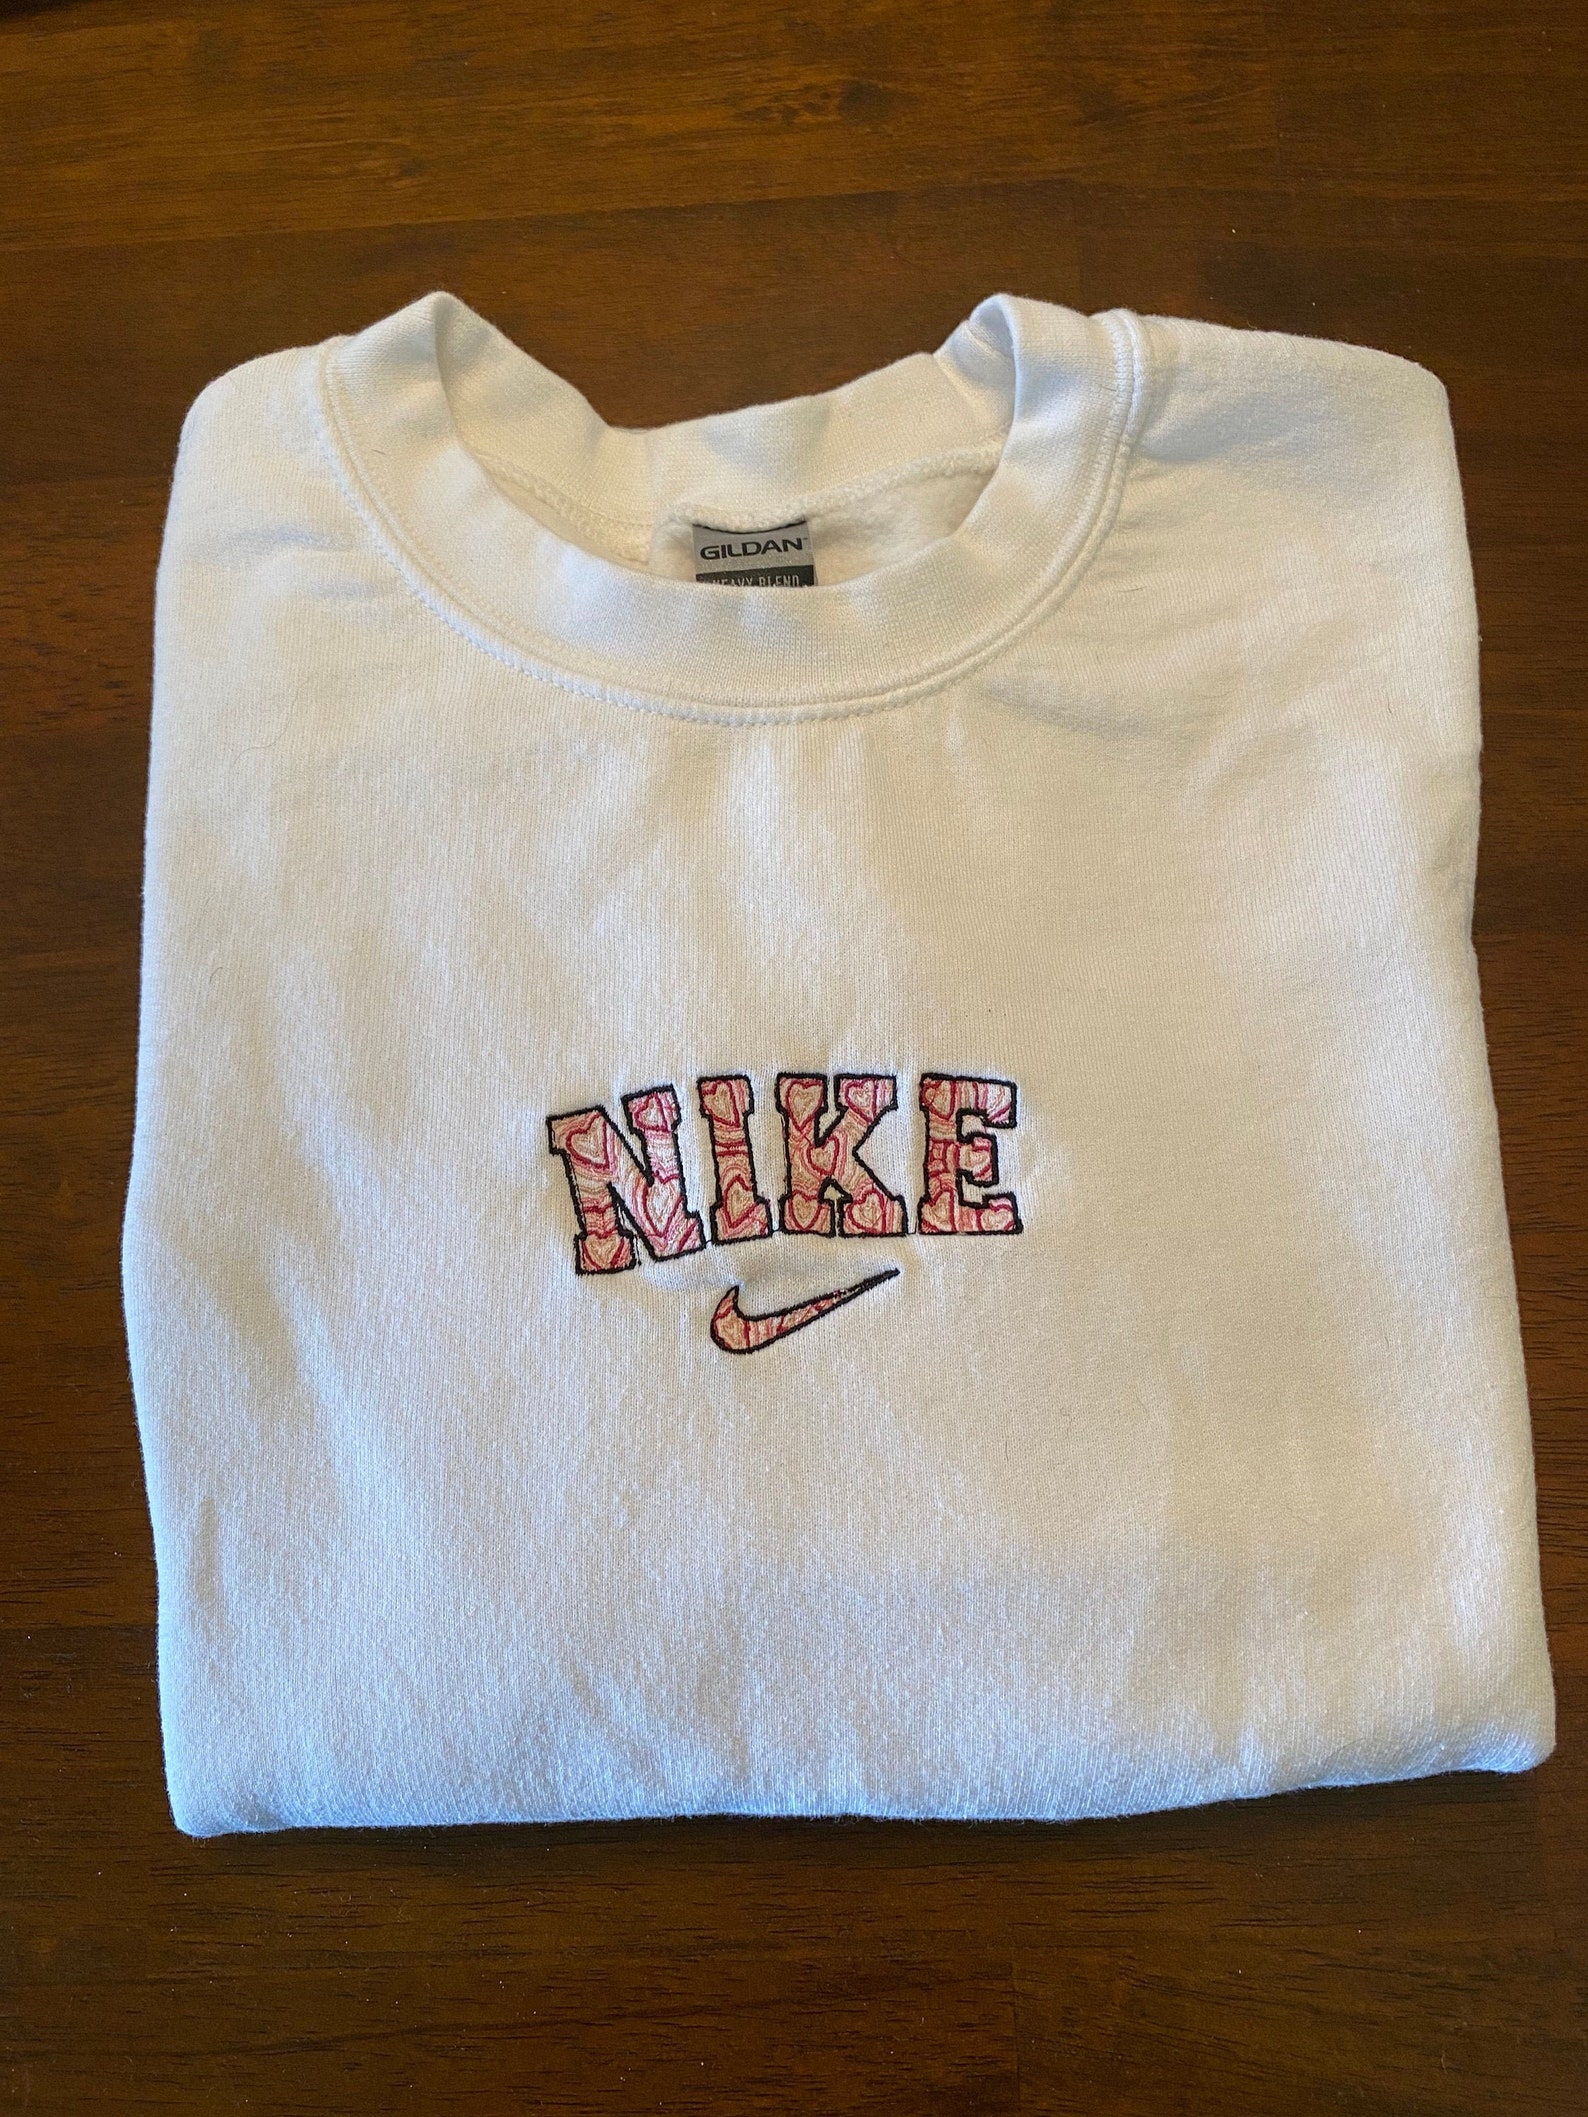 Embroidered Nike Heart Crewneck | Etsy